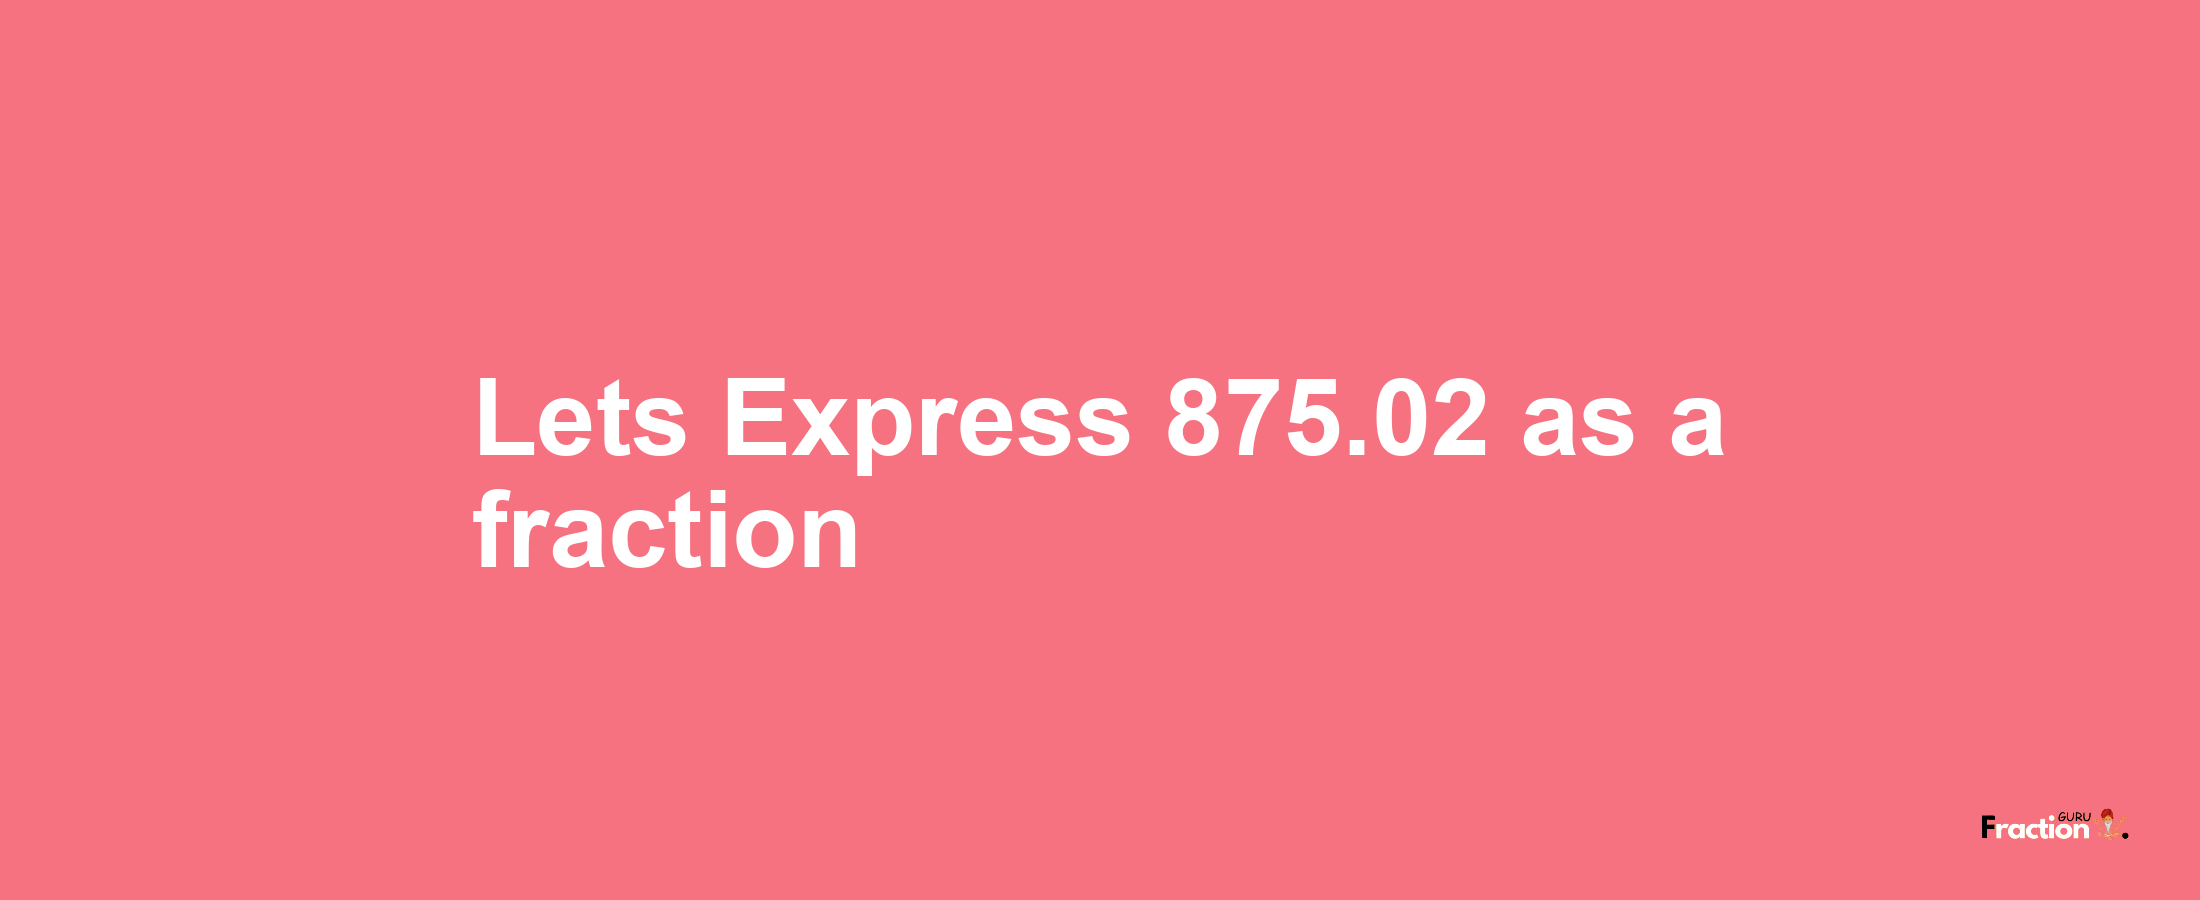 Lets Express 875.02 as afraction